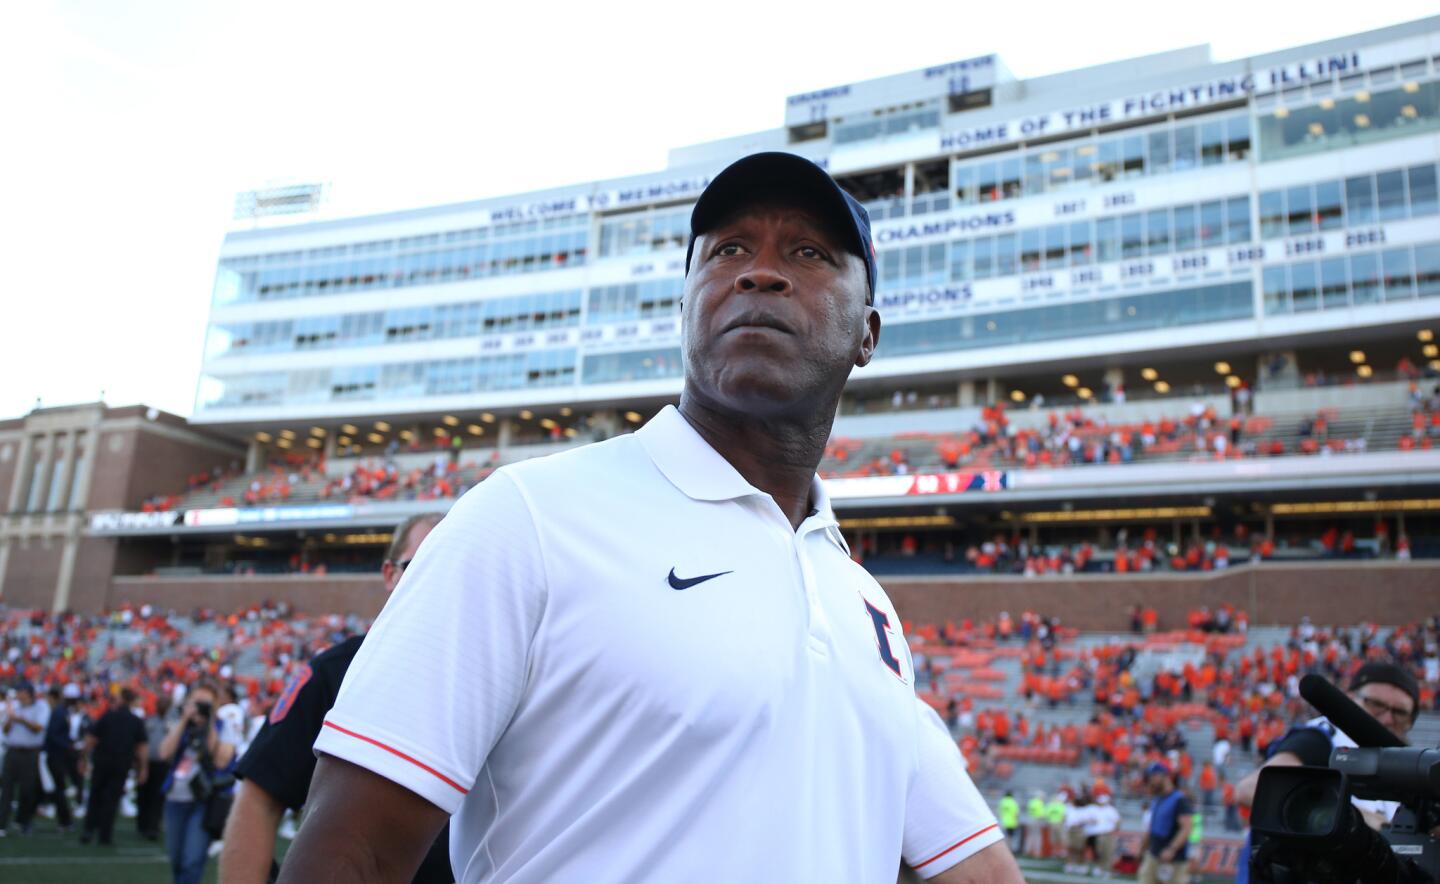 Illini head coach Lovie Smith walks off the field after a 52-3 win over Murray State at Memorial Stadium on Sept. 3, 2016, in Champaign.